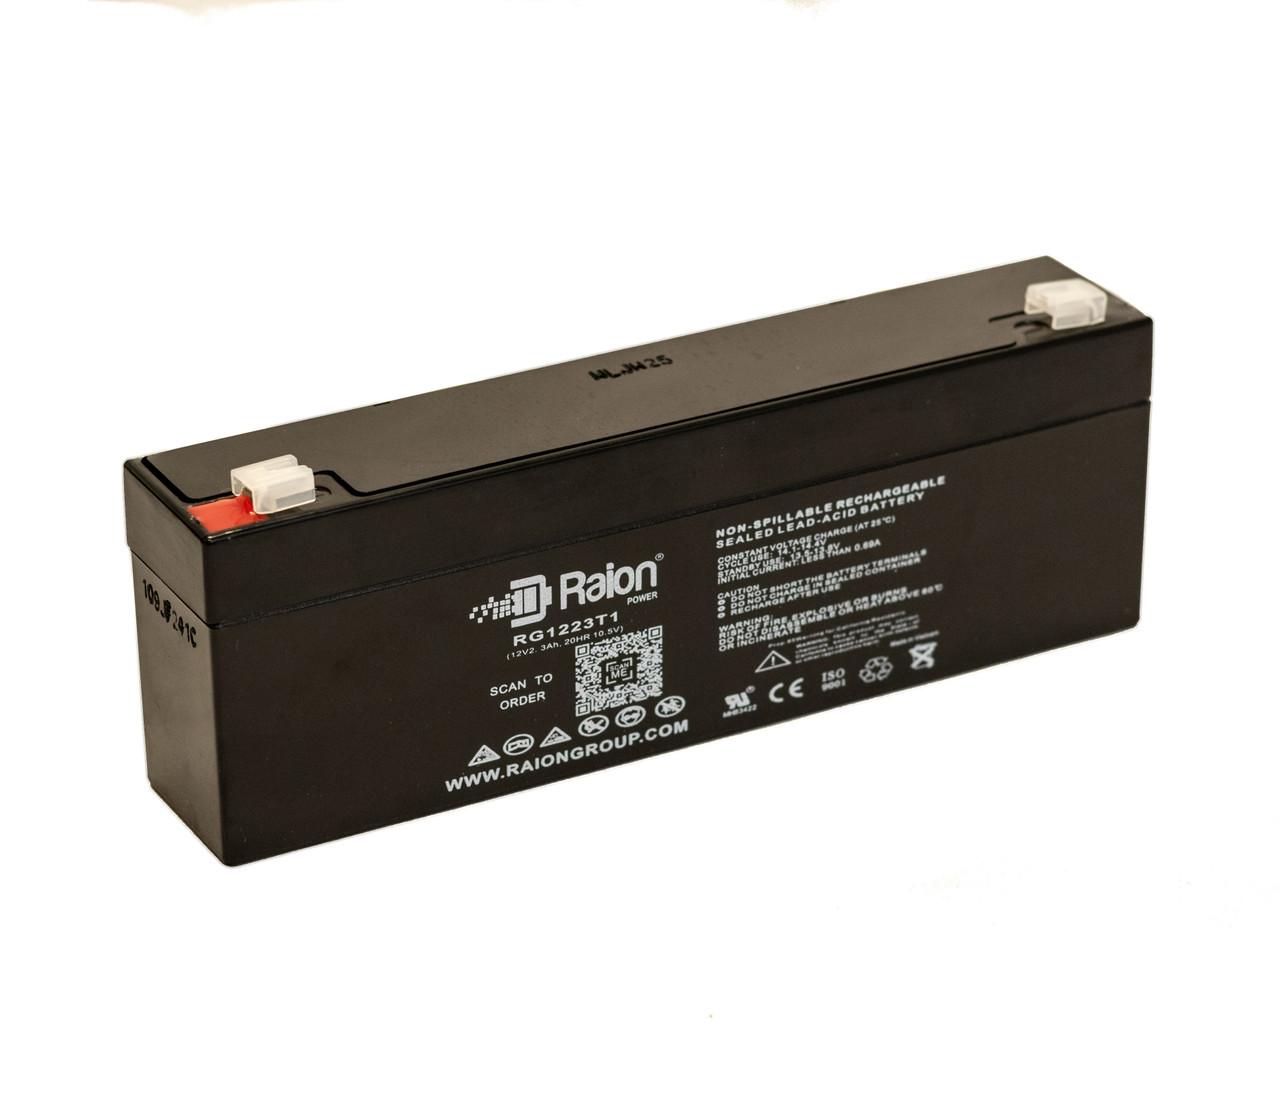 Raion Power RG1223T1 Replacement Battery for Hitachi HP2-12